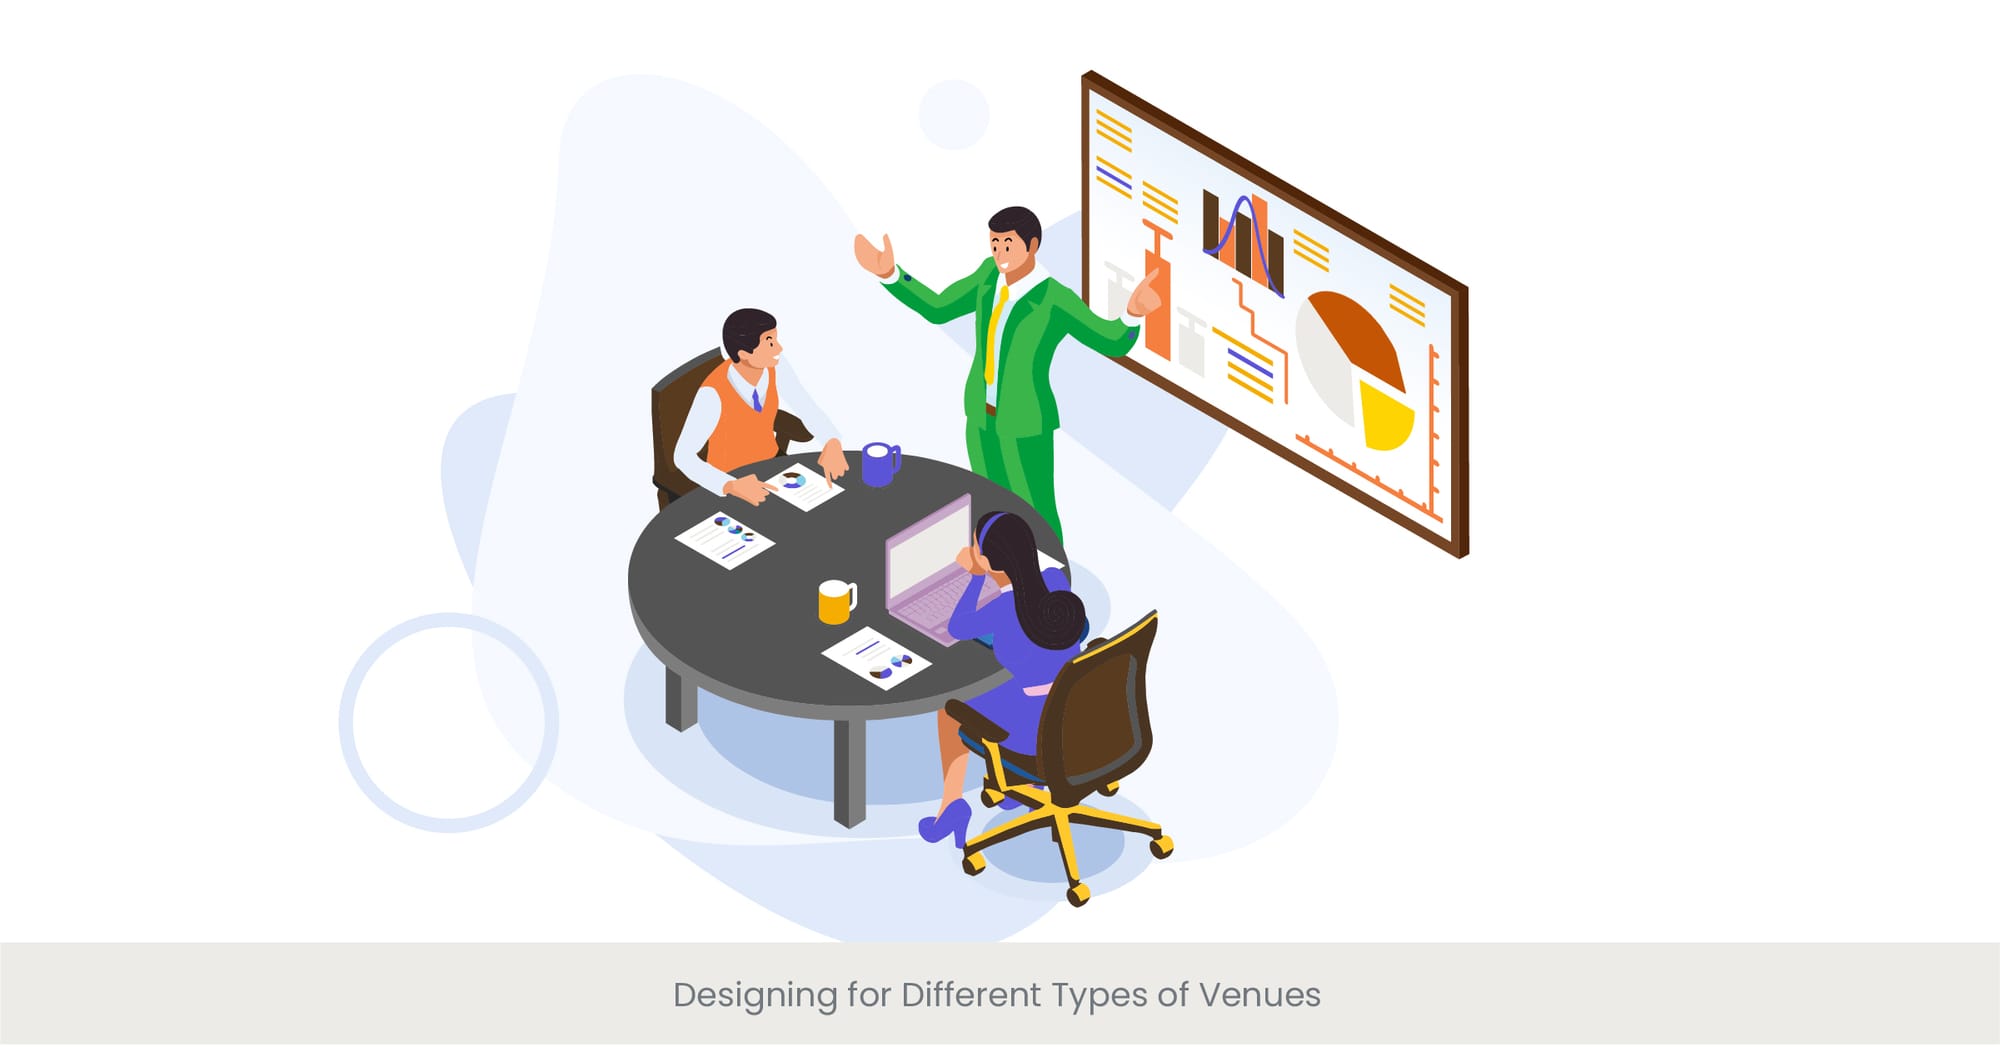 Designing for Different Types of Venues